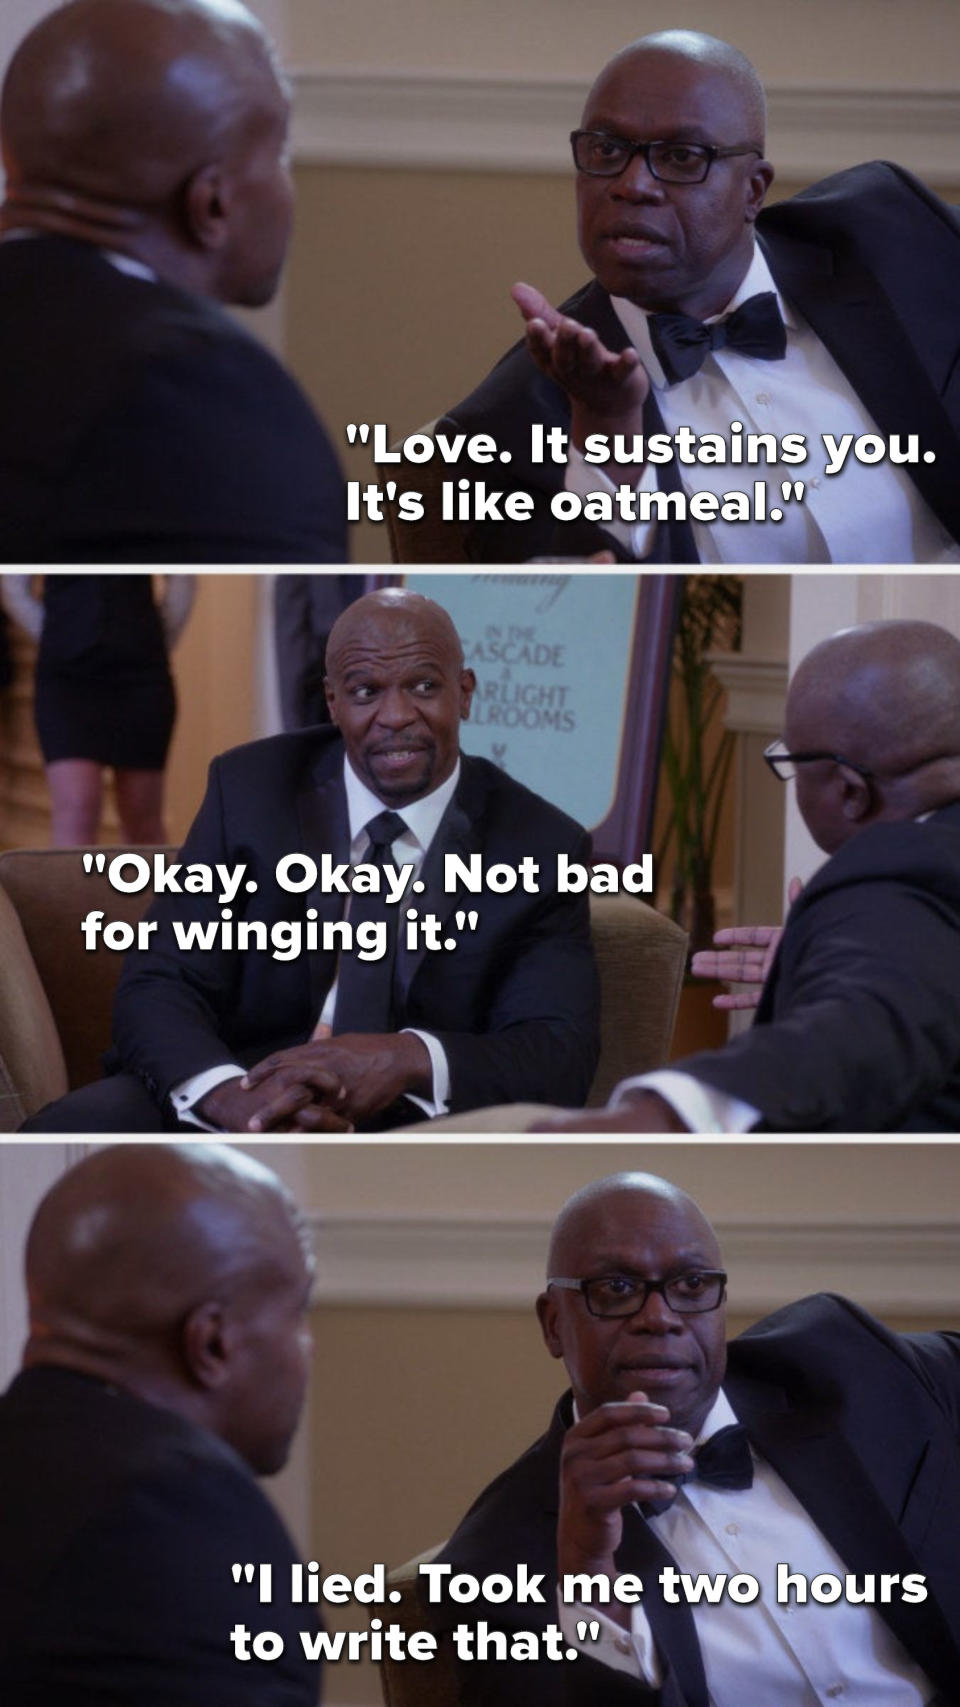 On Brooklyn Nine Nine, Holt says, Love, it sustains you, it's like oatmeal, Terry says, Okay, okay, not bad for winging it, and Holt says, I lied, took me two hours to write that